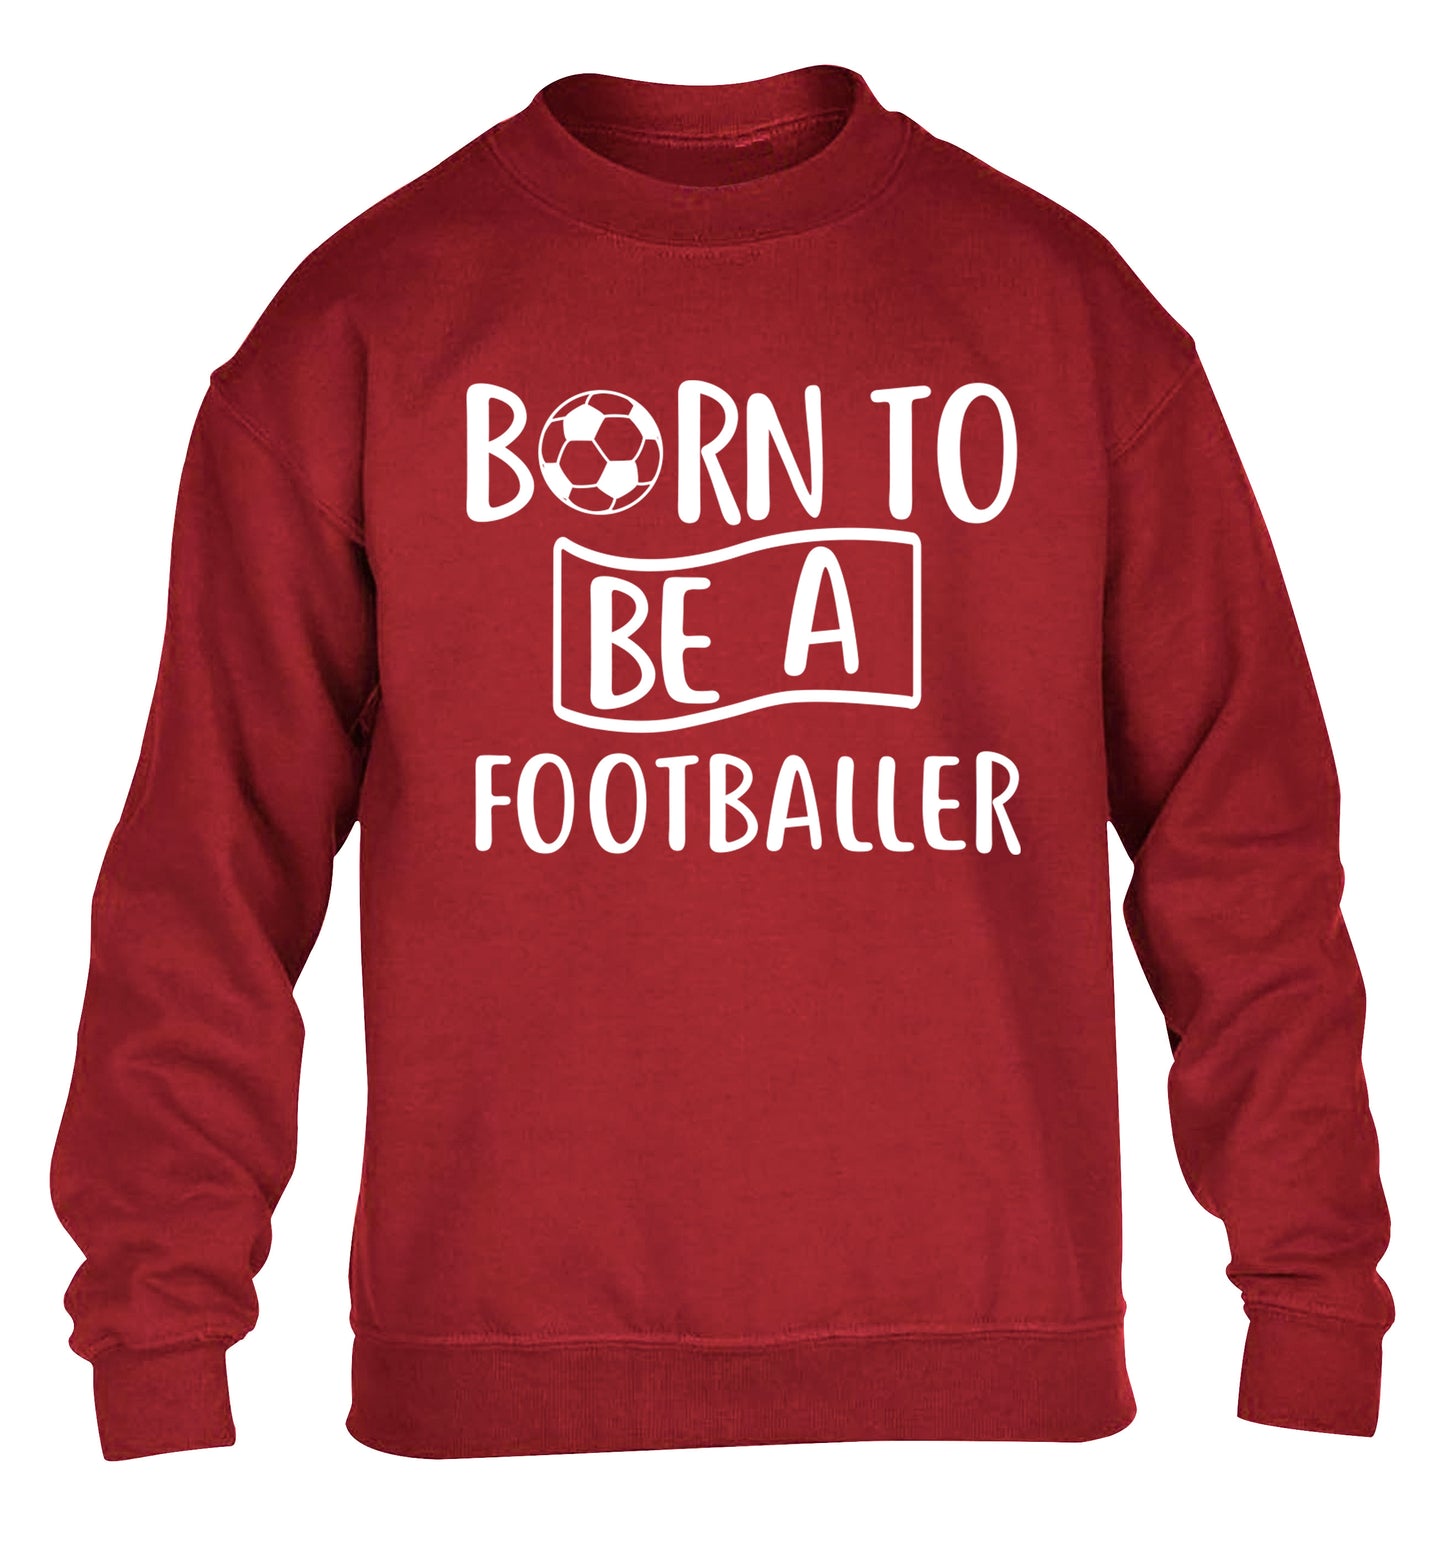 Born to be a footballer children's grey sweater 12-14 Years